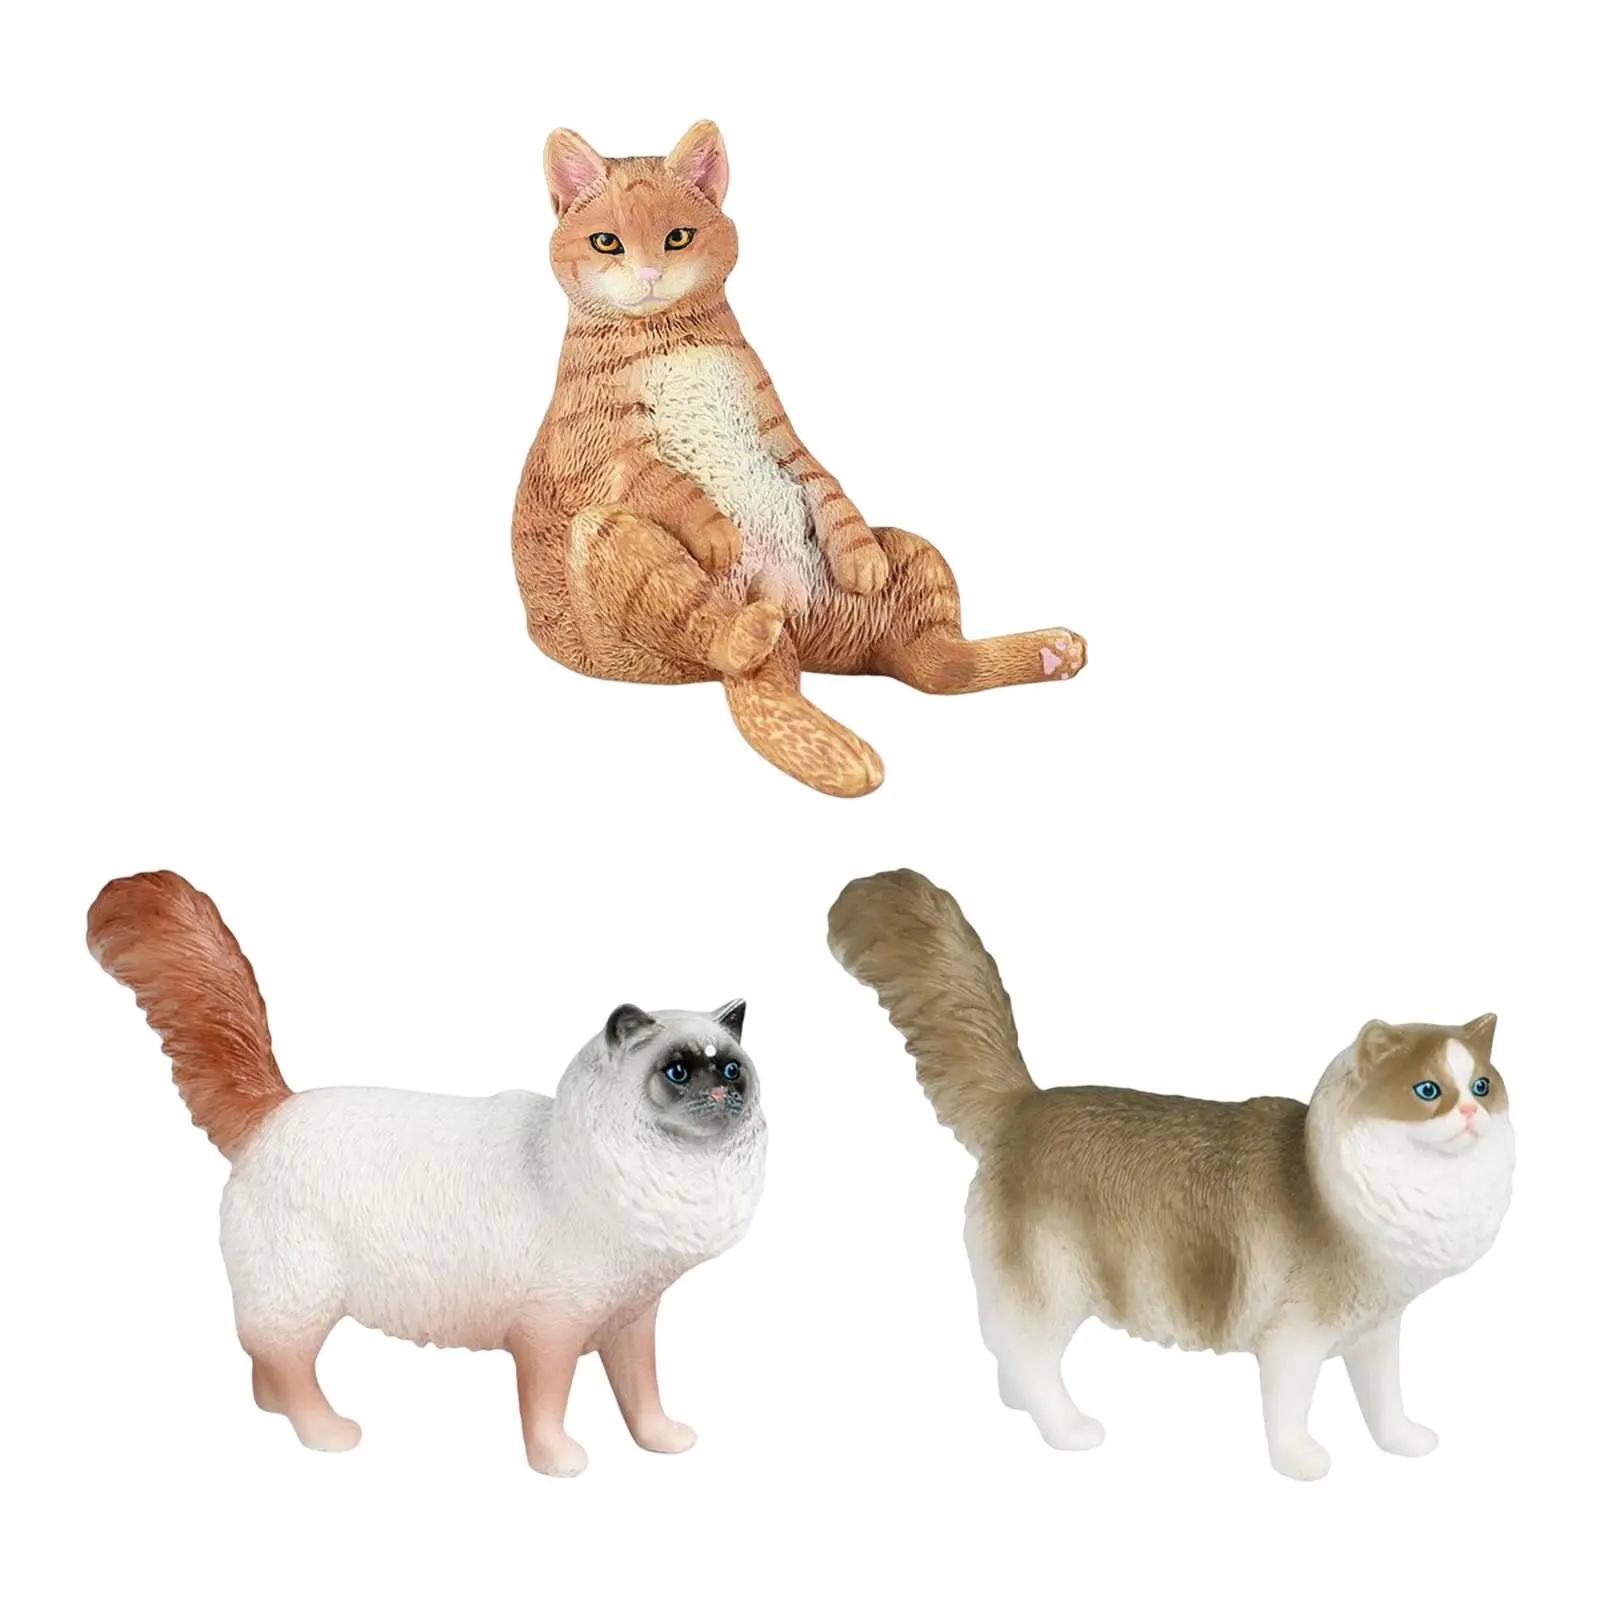 High Simulation Miniature Cat Figure Small Animals Figures Collection Playset Figurine for Decor Cake Topper Housewarming Gifts